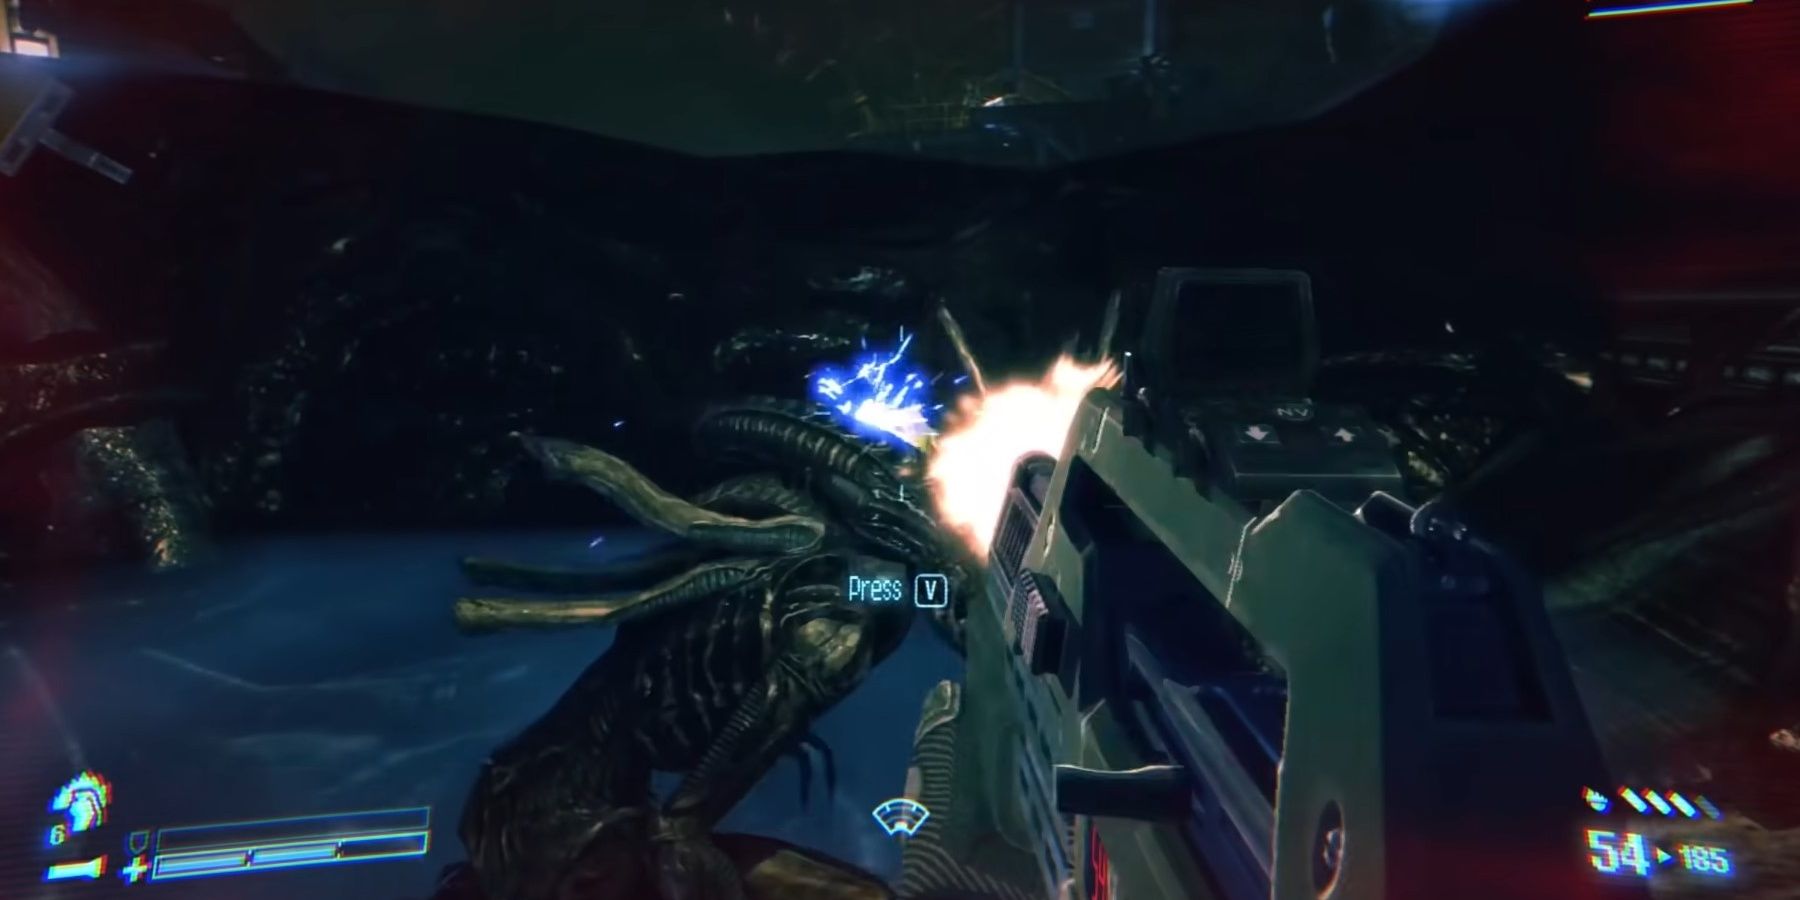 The player blasting at aliens in Aliens: Colonial Marines.